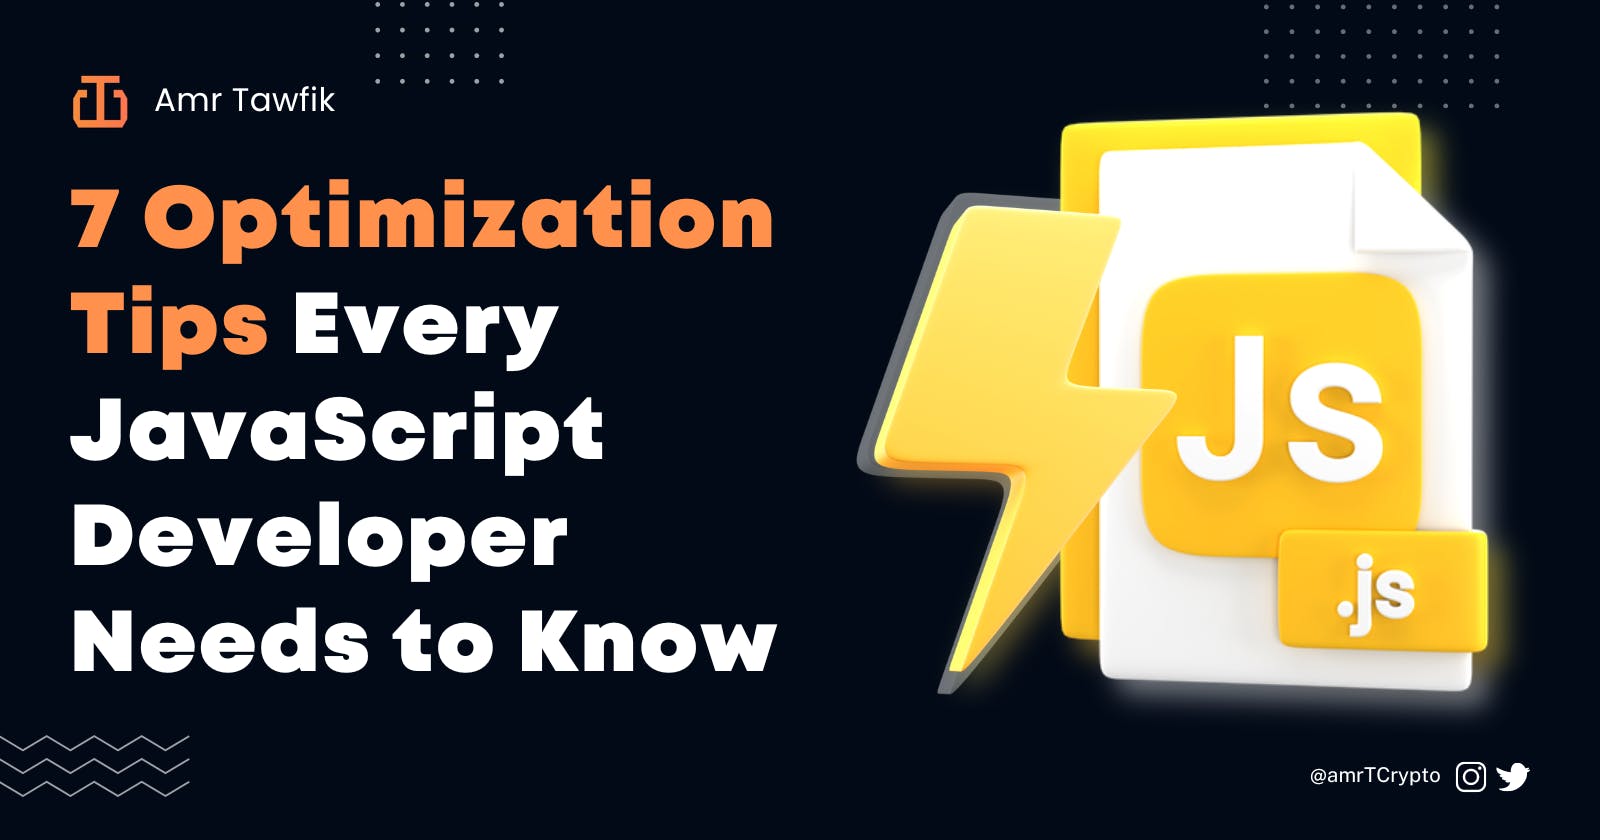 7 Optimization Tips Every JavaScript Developer Needs to Know